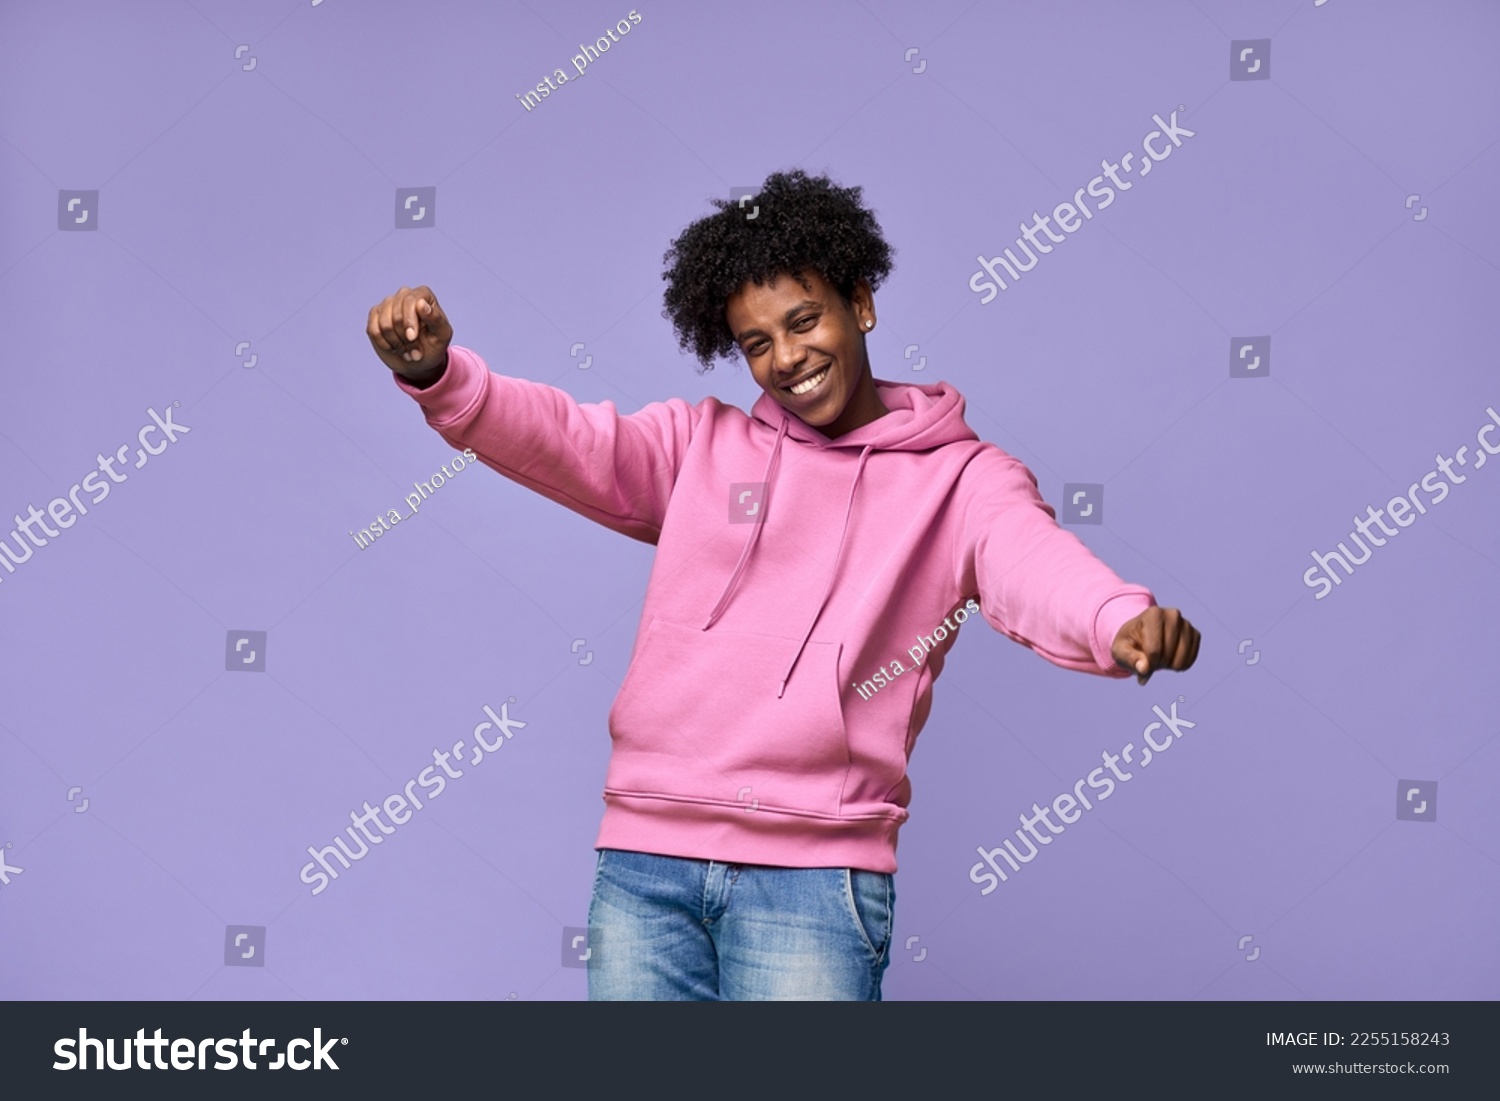 Young happy funky African American teen guy wearing pink hoodie having fun isolated on light purple background. Smiling cool ethnic generation z teenager student model dancing and moving. #2255158243